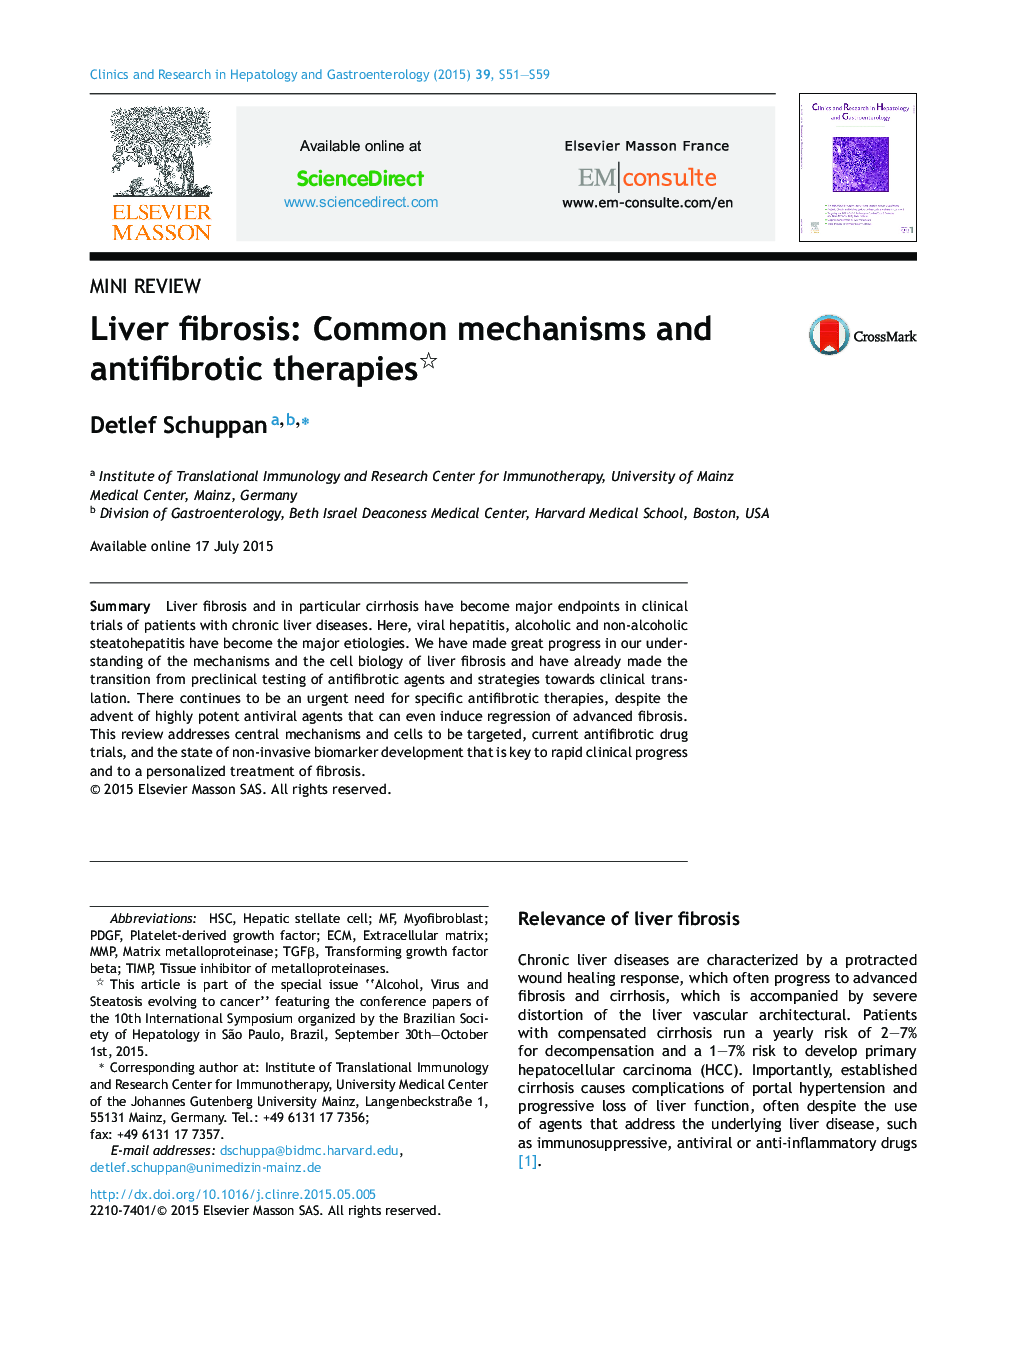 Liver fibrosis: Common mechanisms and antifibrotic therapies 